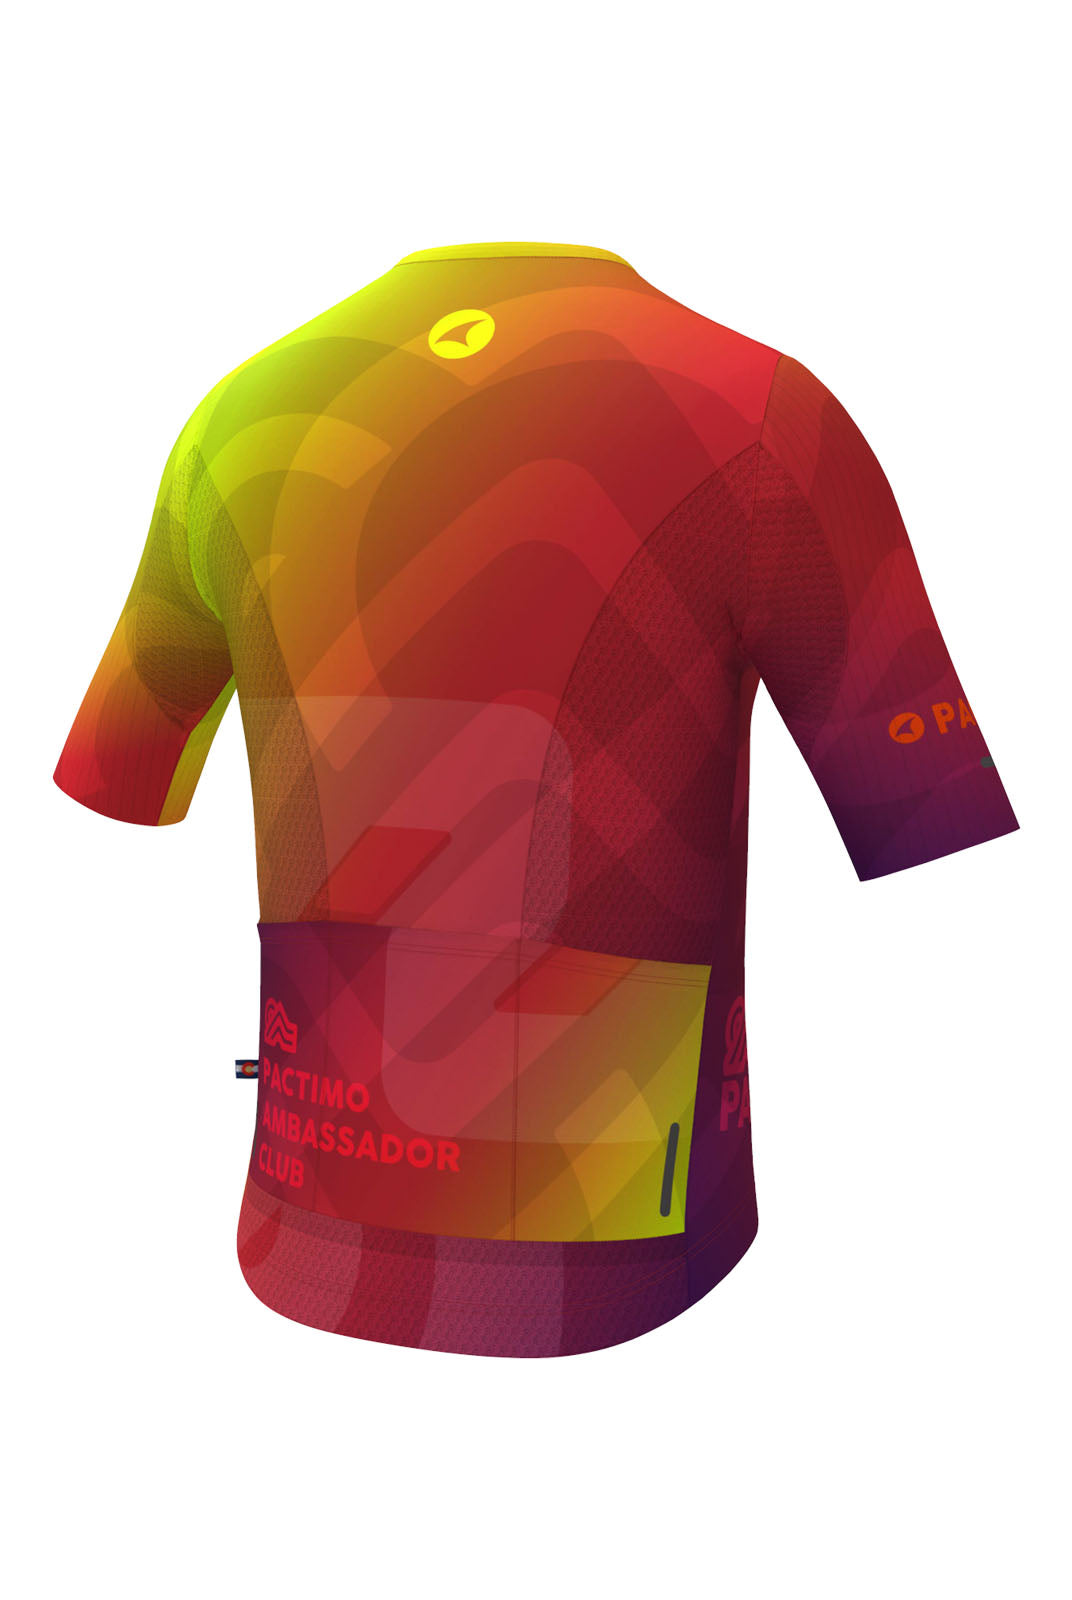 Men's PAC Flyte Cycling Jersey - Warm Fade Back View